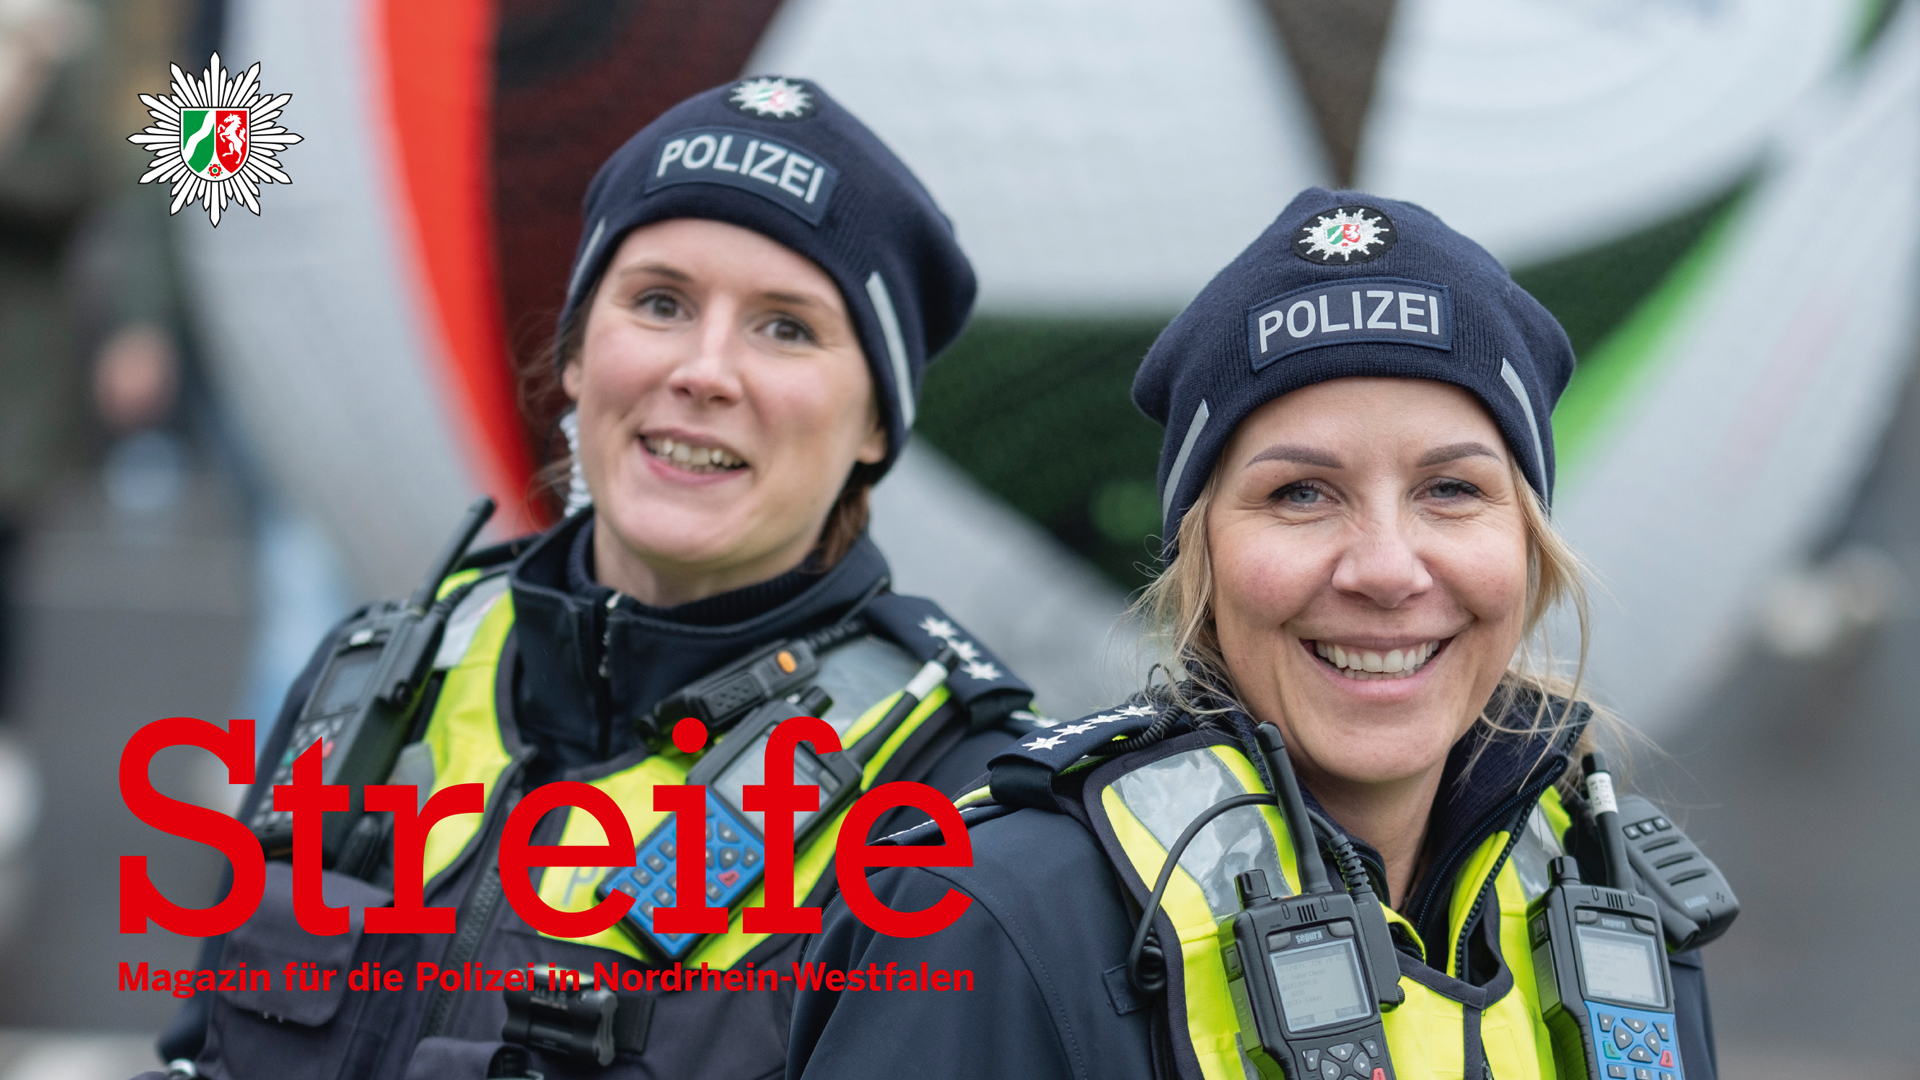 Police officers Nicole Kowalski and Jutta Rengelink from Dortmund police headquarters can be seen in the foreground. They are wearing uniforms and smiling at the camera. The official UEFA EURO 2024 soccer can be seen in large in the background. At the bottom left is the lettering "Streife", below it "Magazin für die Polizei in Nordrhein-Westfalen". The NRW police logo can be seen in the top left-hand corner.